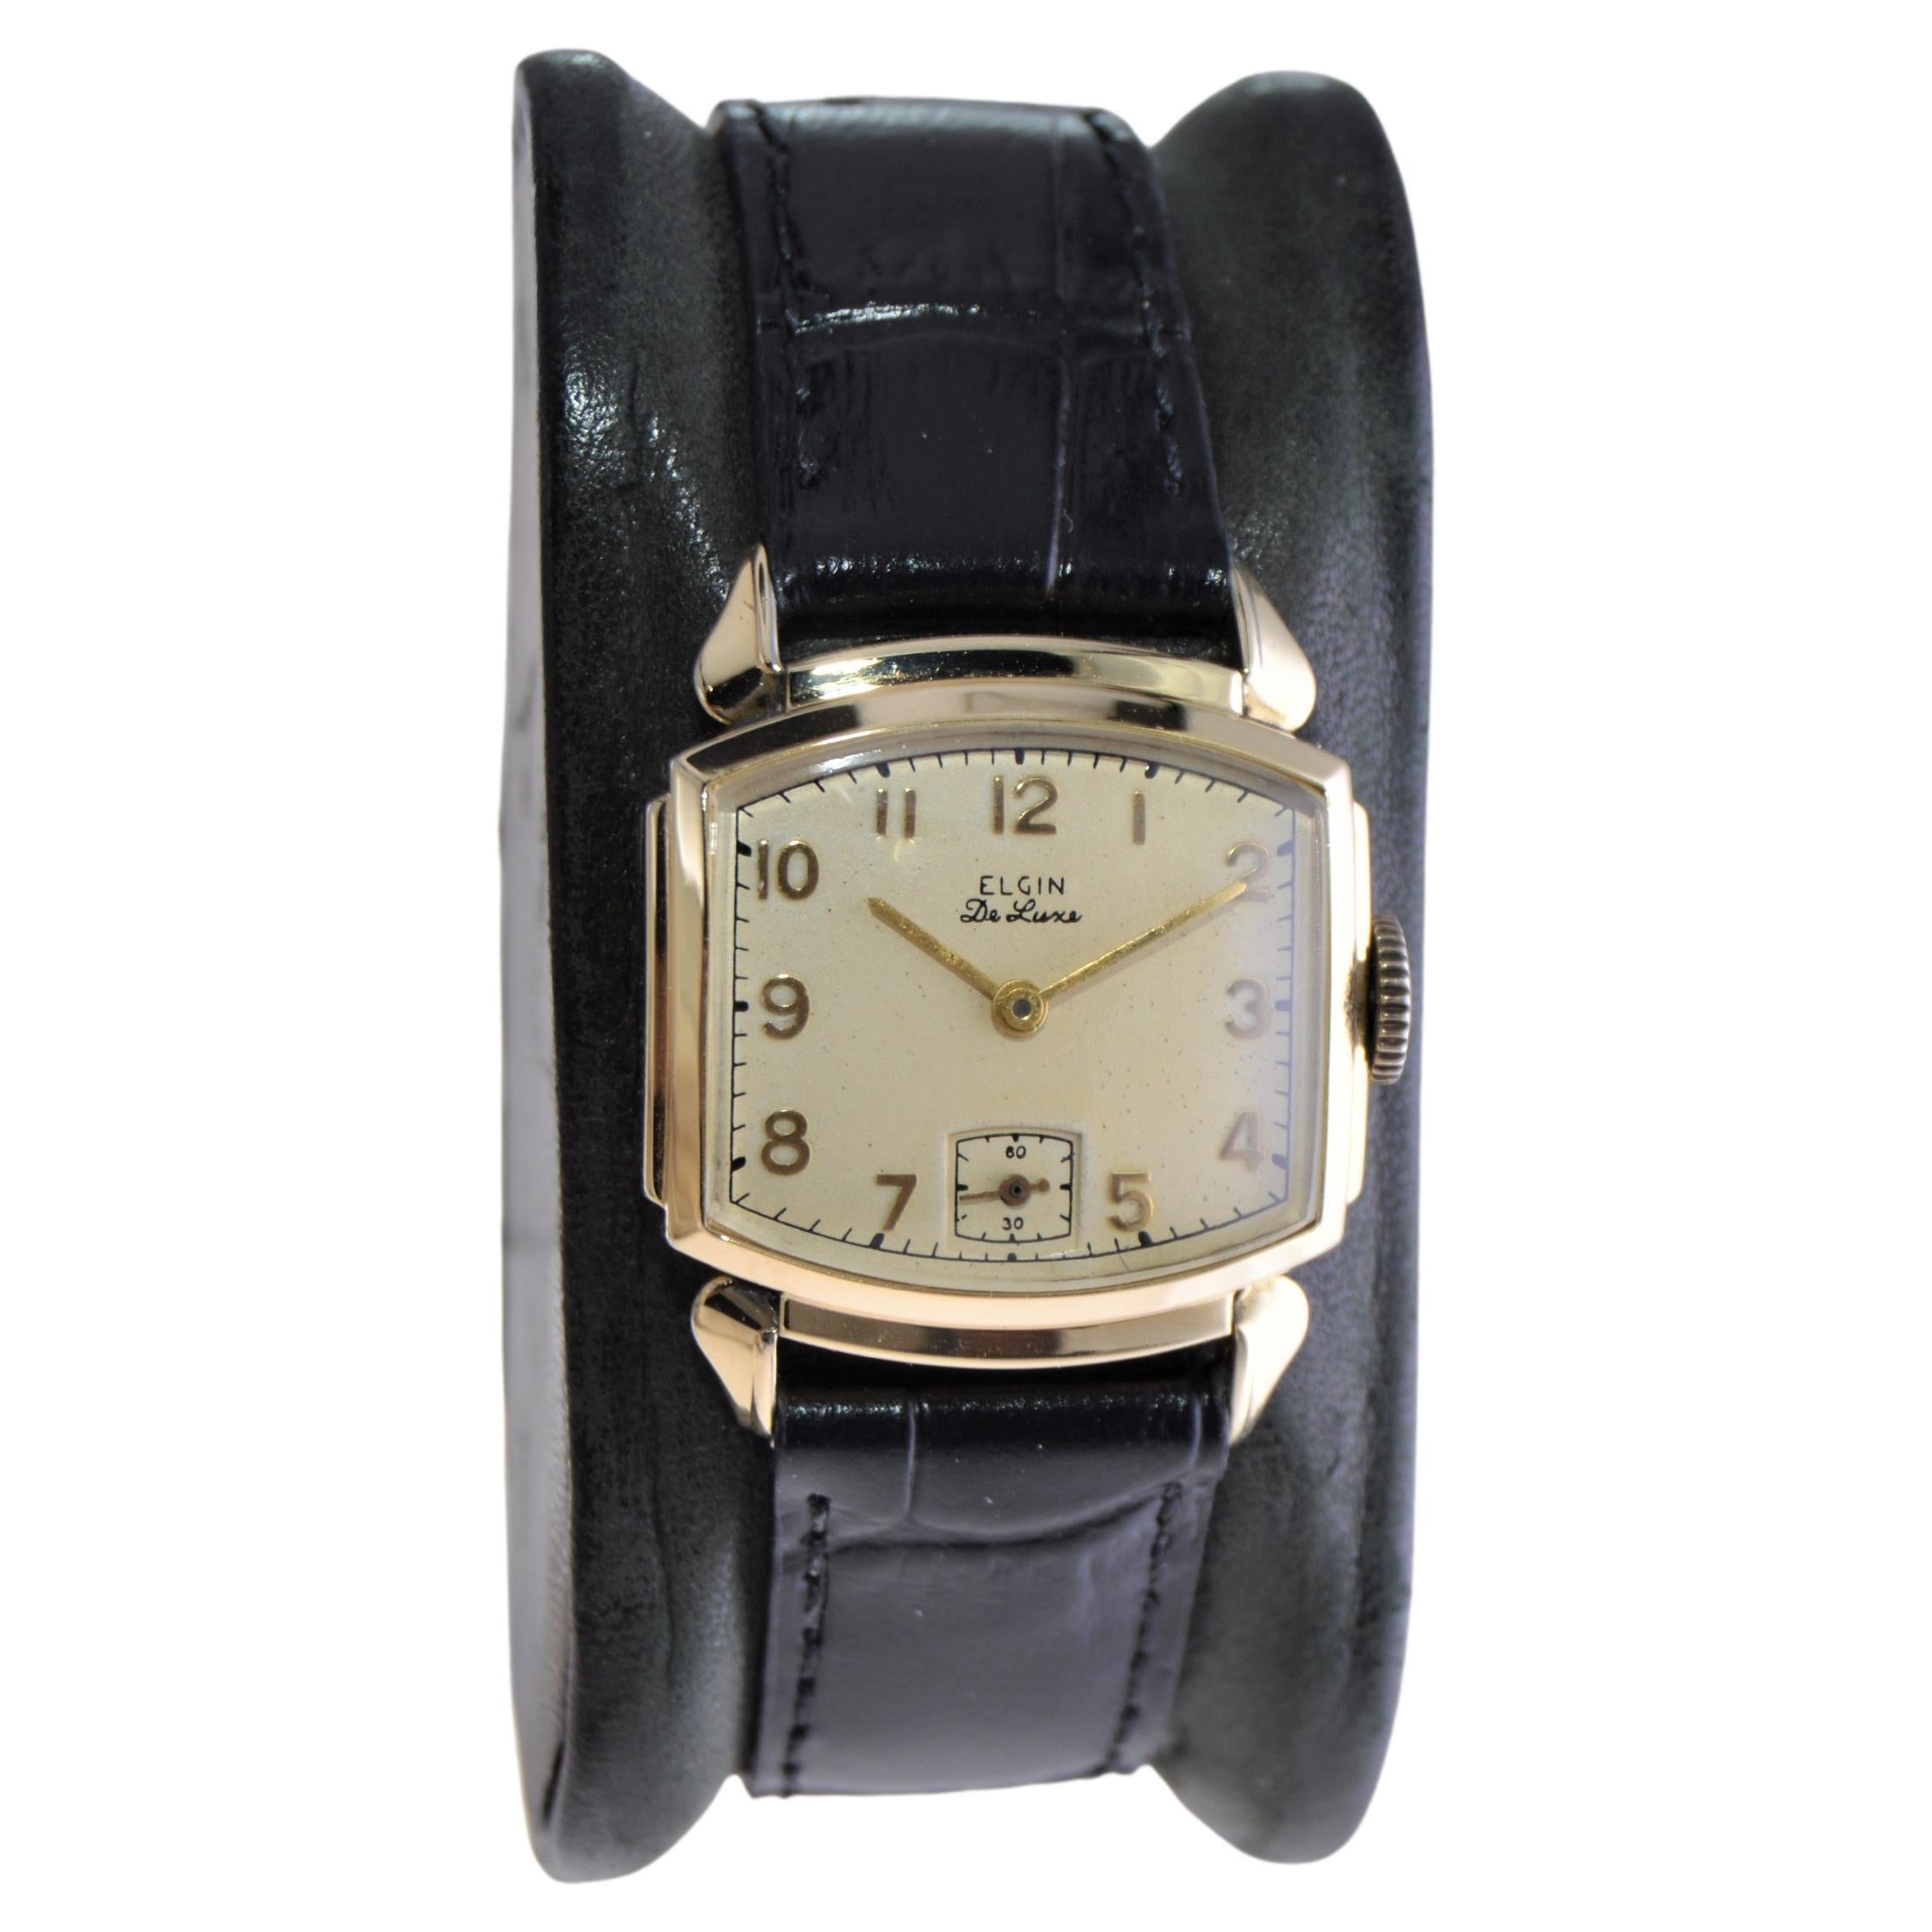 What is an art deco watch?